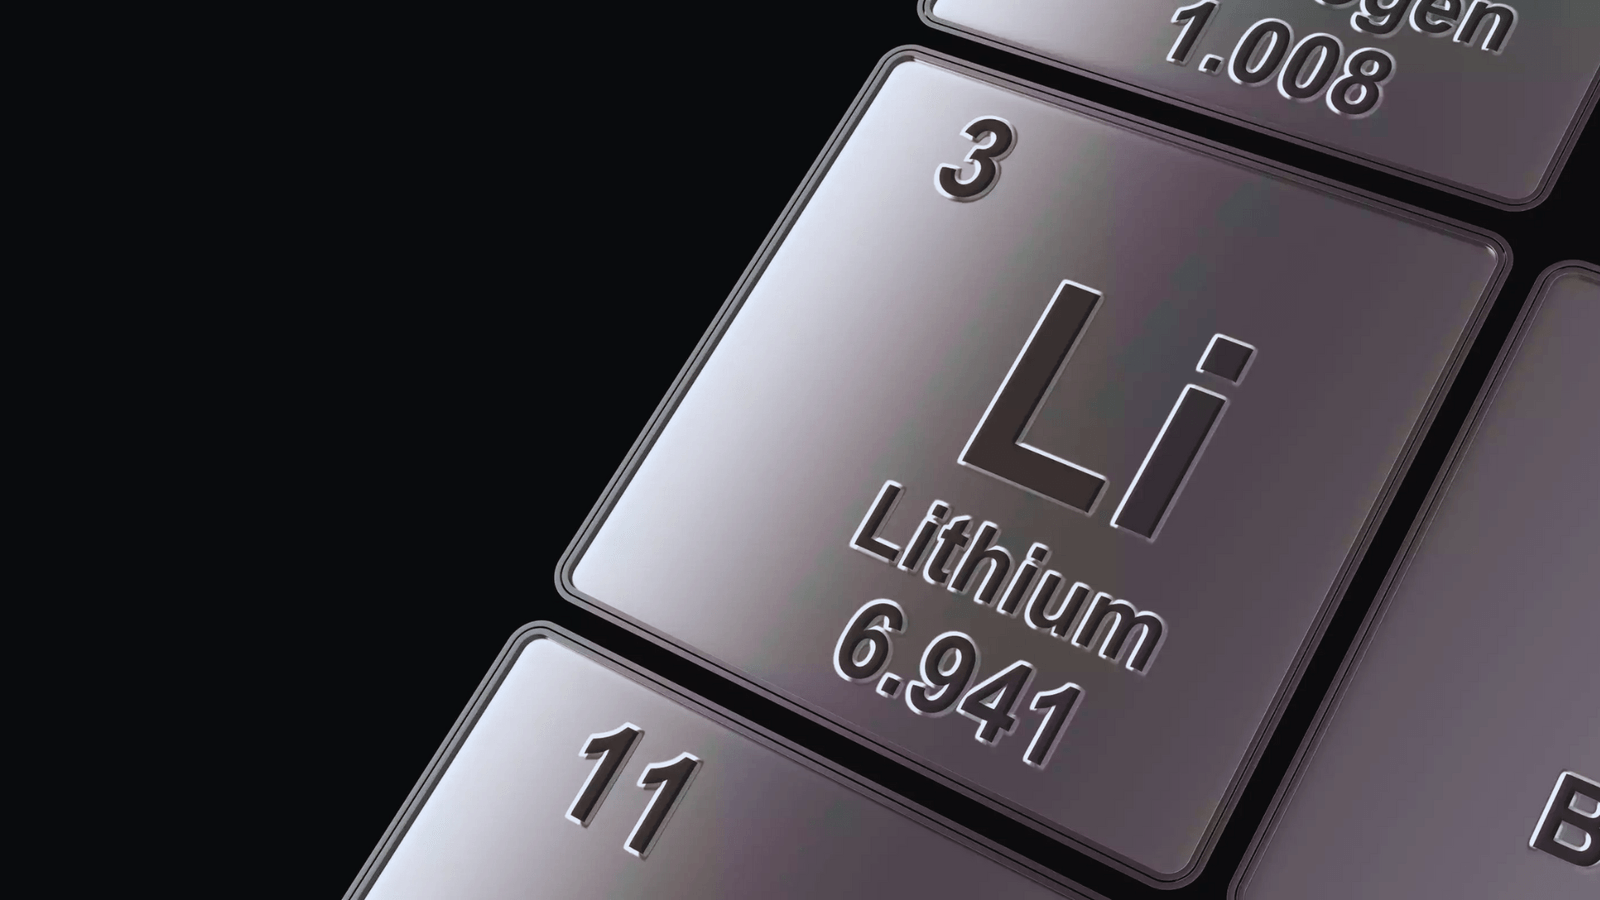 Jharkhand's Lithium Discovery: Fueling India's Sustainable Growth